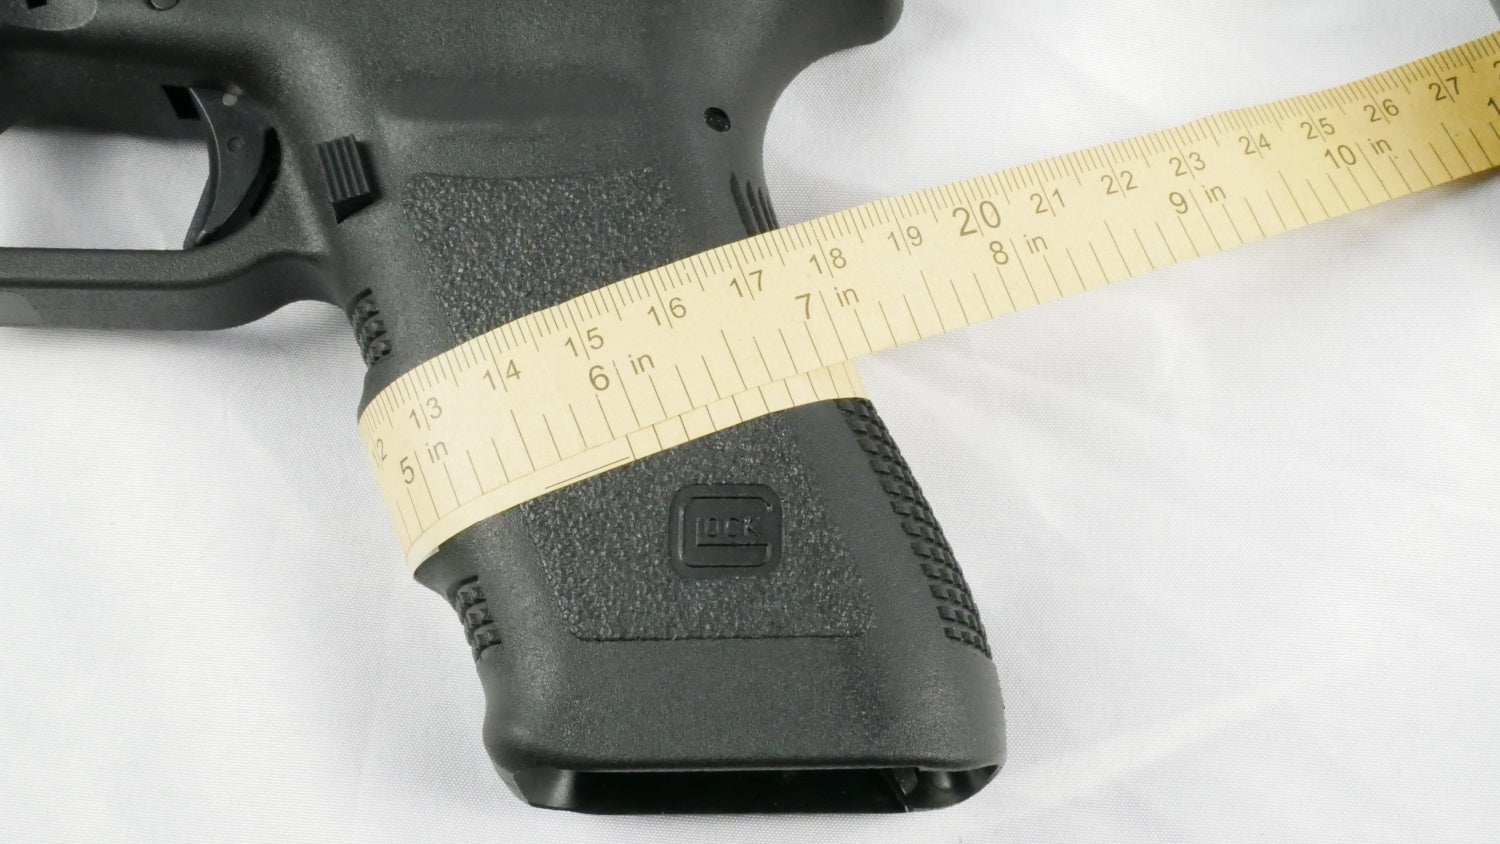 Glock 20SF grip measures 5 3/4" in circumference around the middle. 